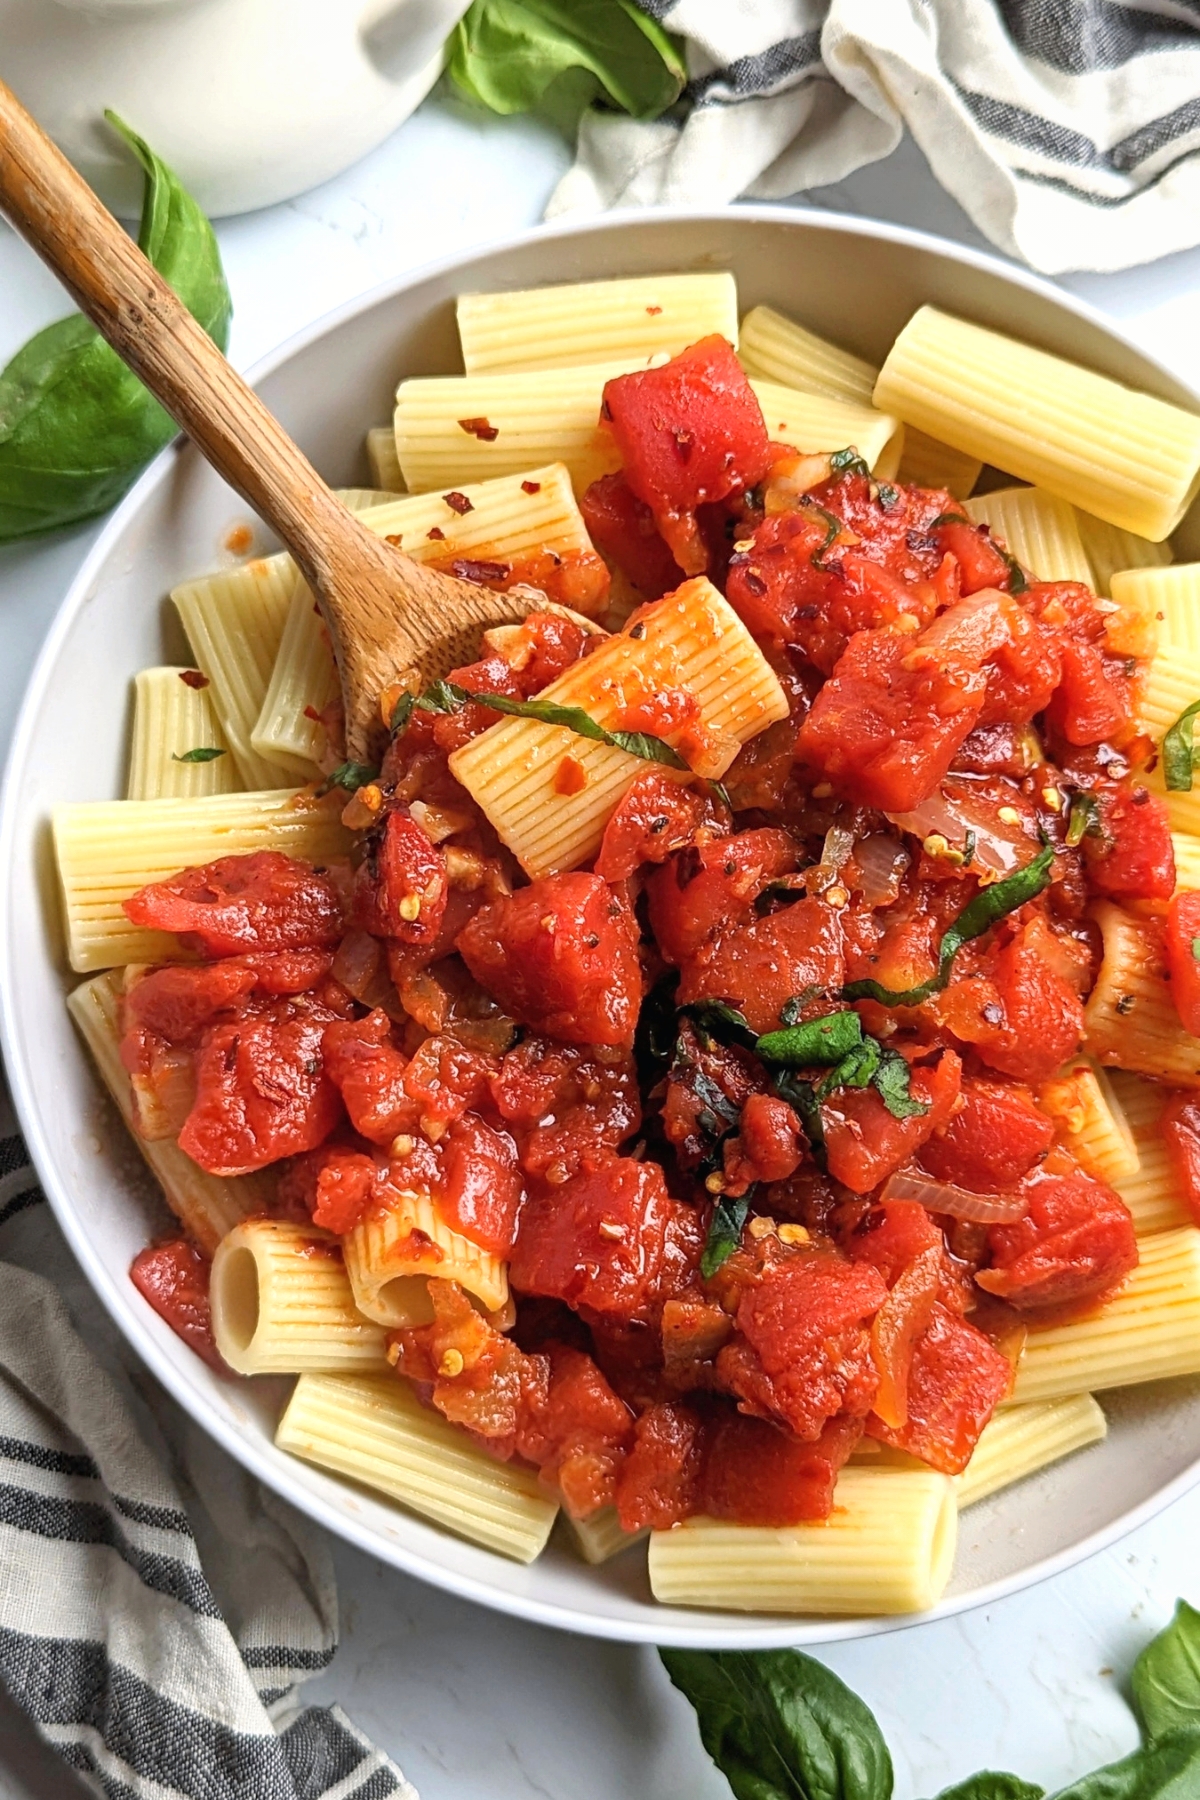 rigatoni with arrabbiata sauce vegan thick pasta recipes 30 minute arrabbiata sauce easy italian sauces from pantry tomatoes and basil and garlic with good olive oil